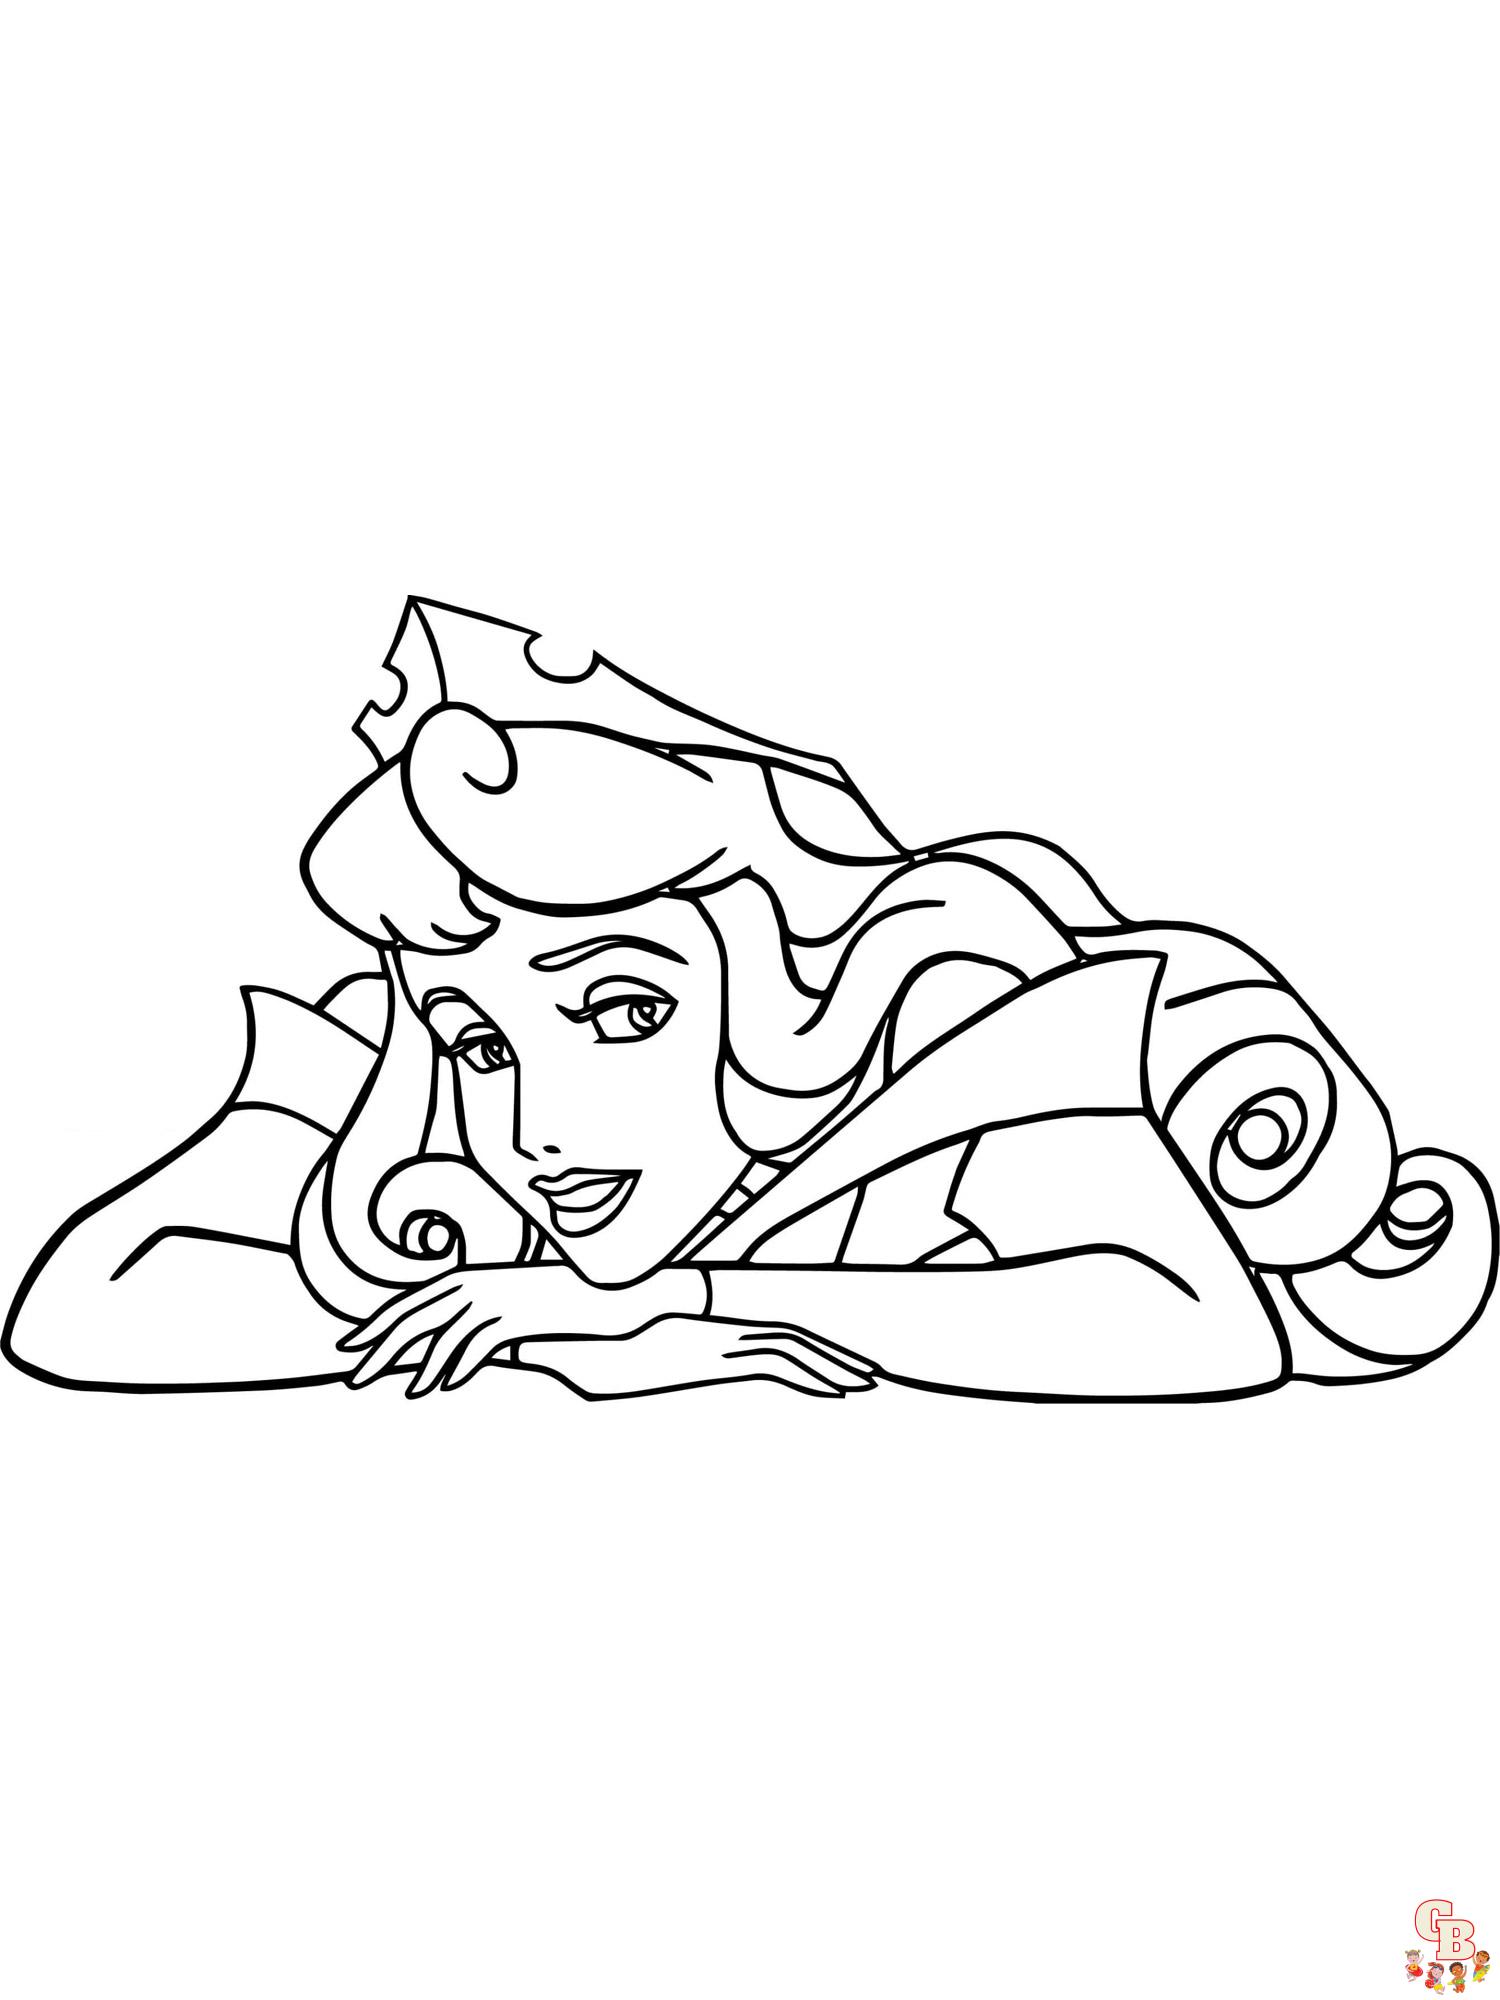 Aurora Coloring Pages 52